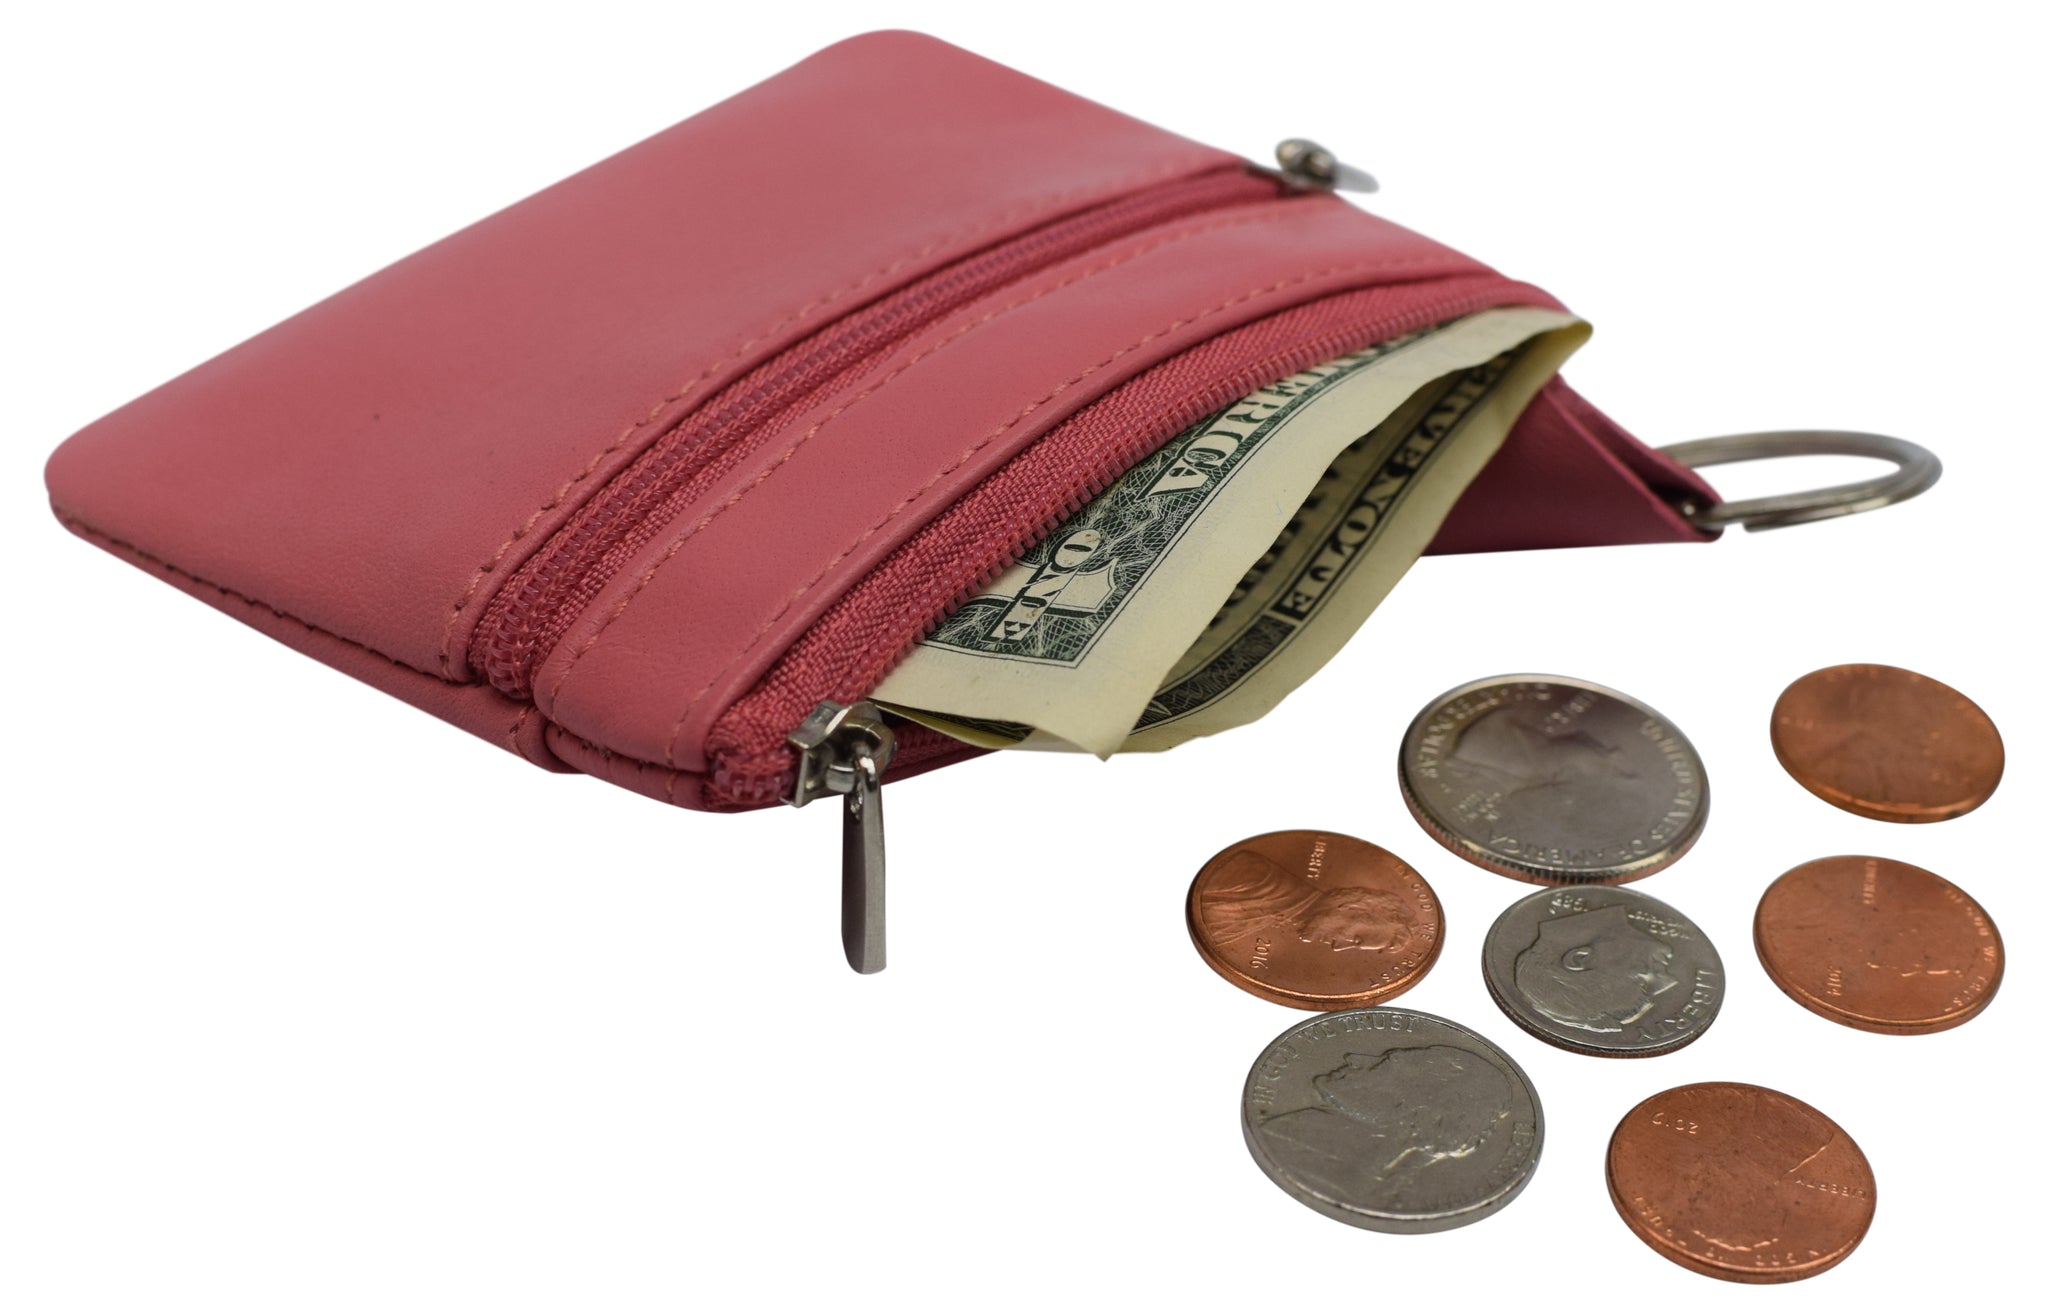 Leather Coin Purse / Vintage Leather Coin Purse / Coin Purse / Clutch money  bag / Cute coin wallet